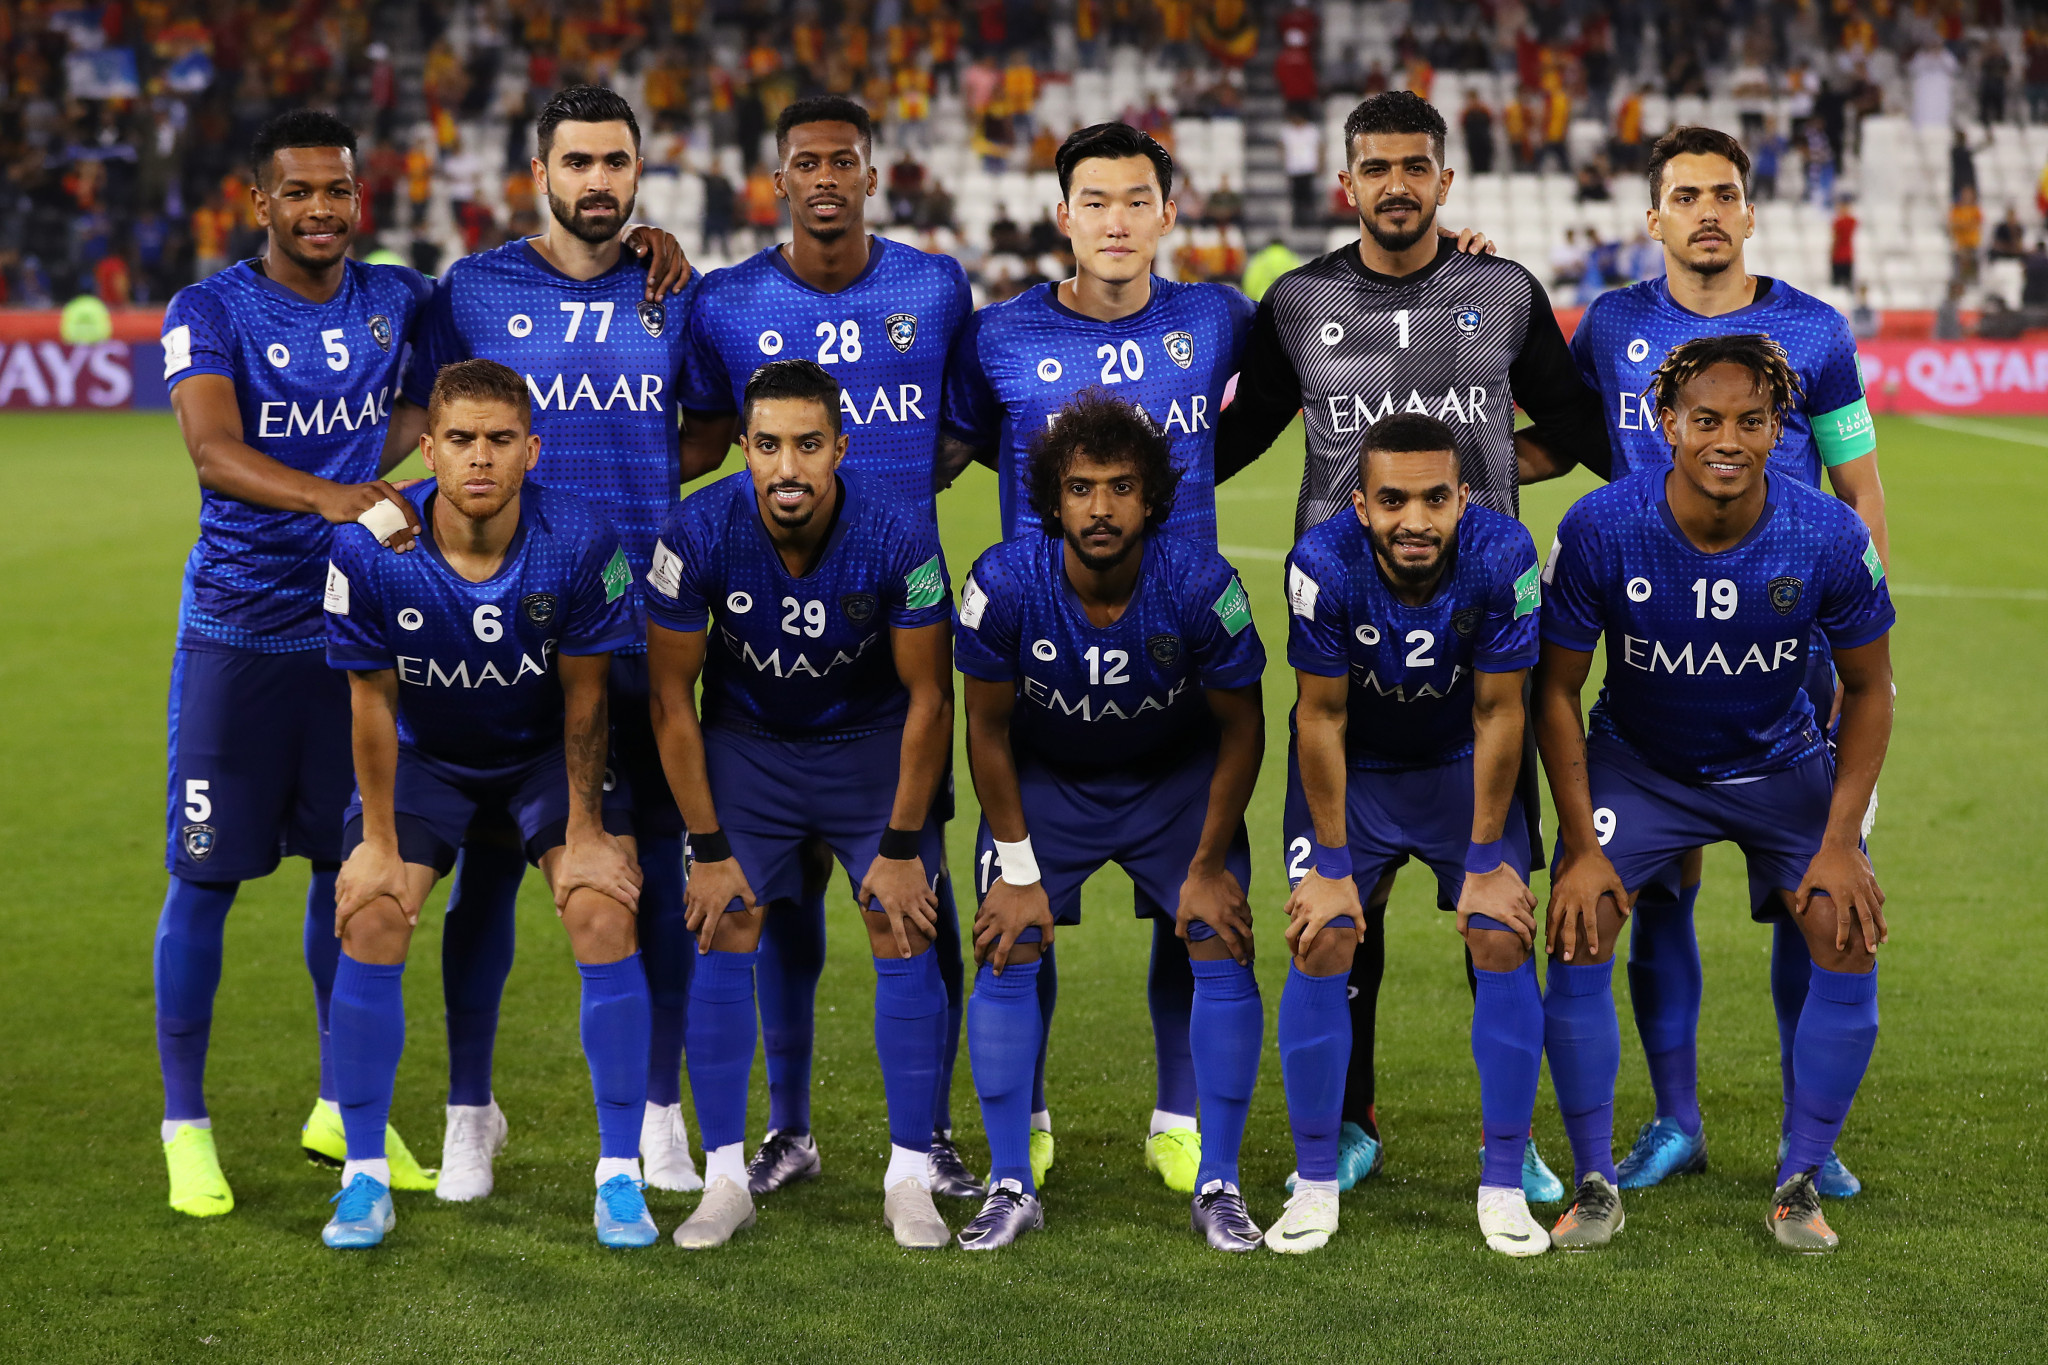 Al Hilal forced to withdraw from AFC Champions League after 15 players test positive for COVID-19